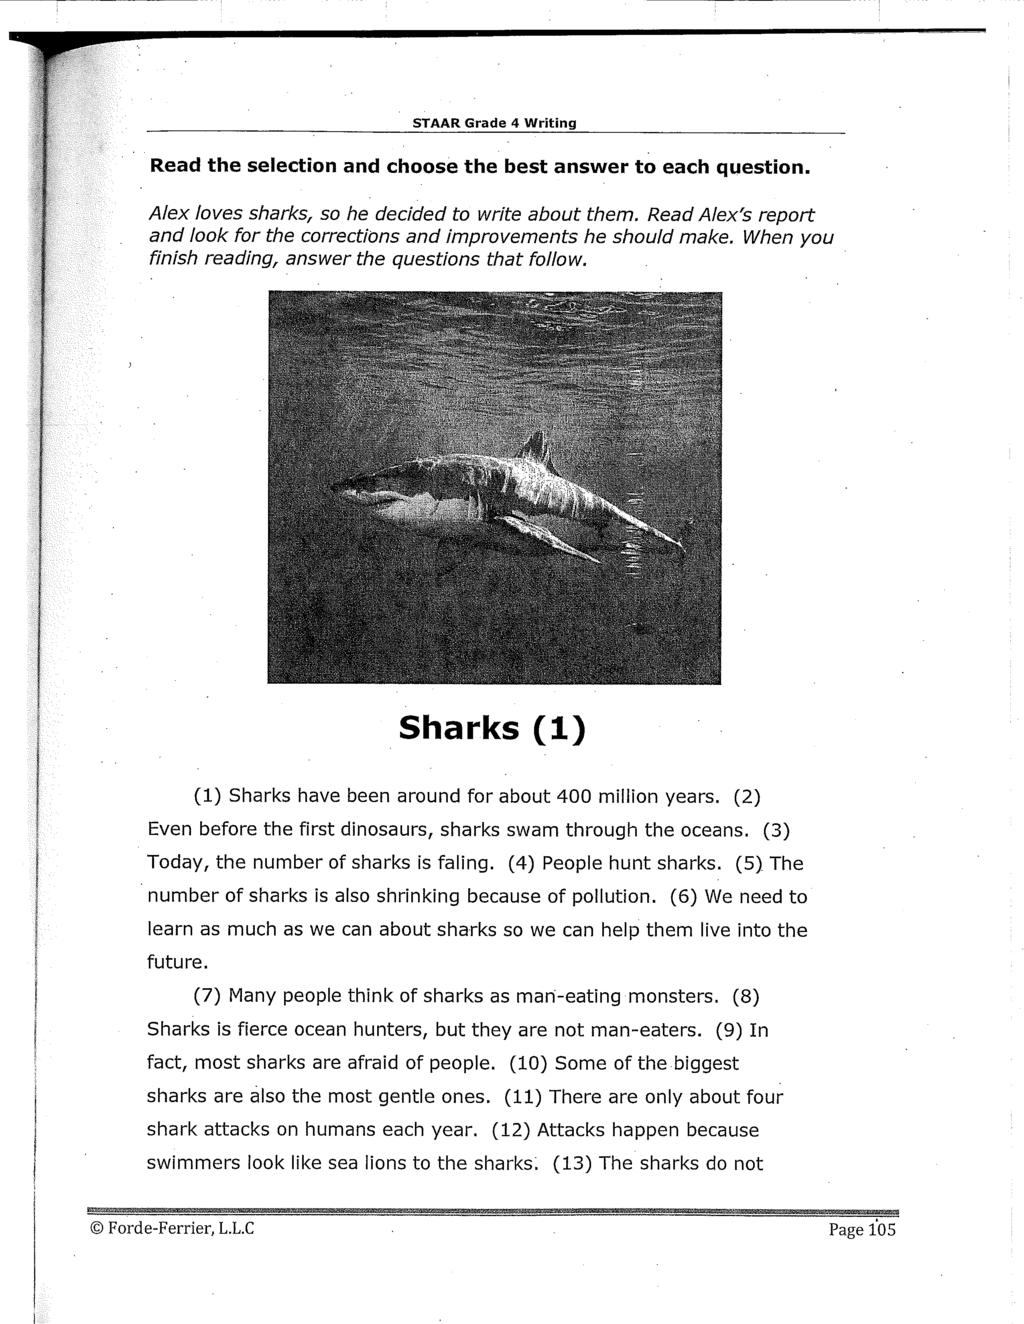 Read the selection and choose the best answer to each question. Alex loves sharks, so he decided to write about them. Read Alex's report and look for the corrections and improvements he should make.